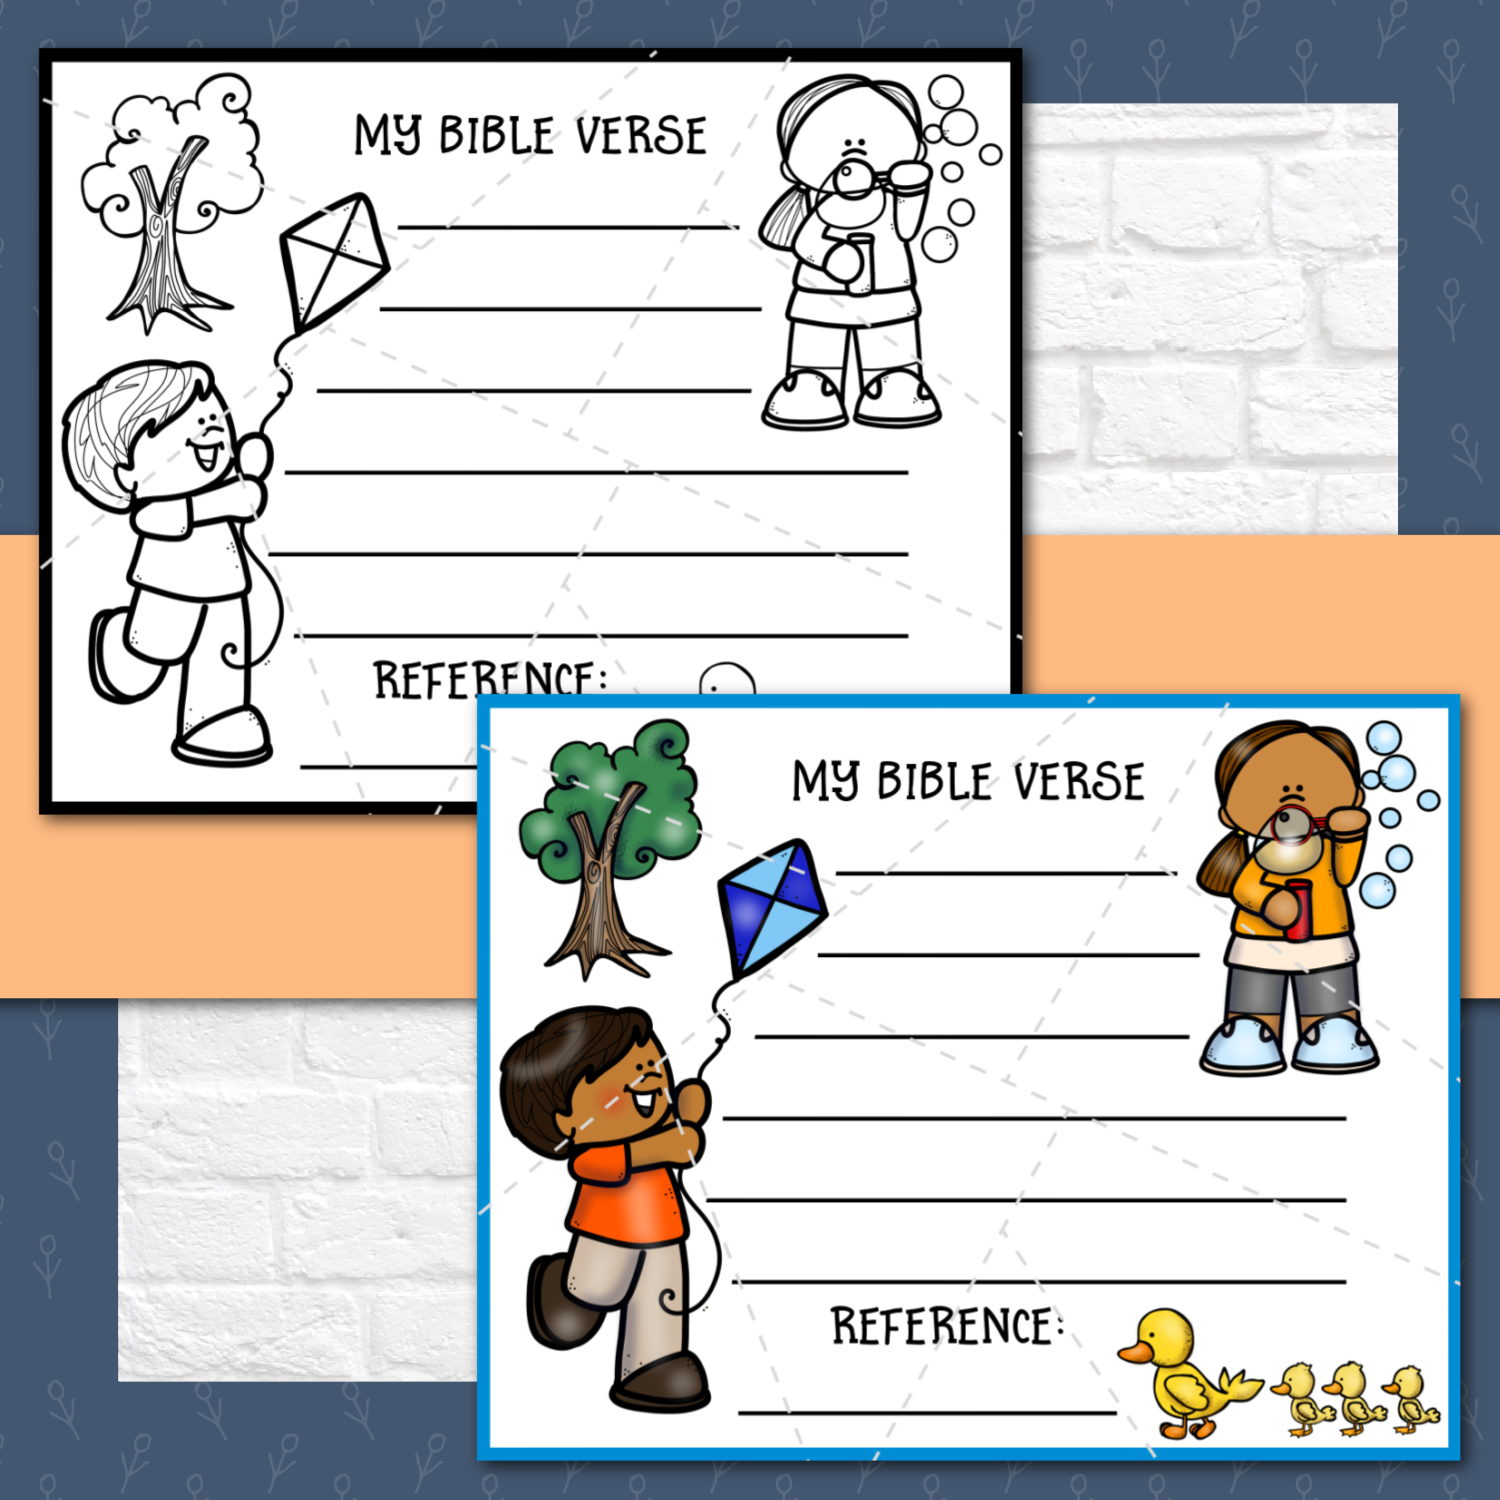 8 Bible Verse Memory Puzzles for 1st and 2nd Graders